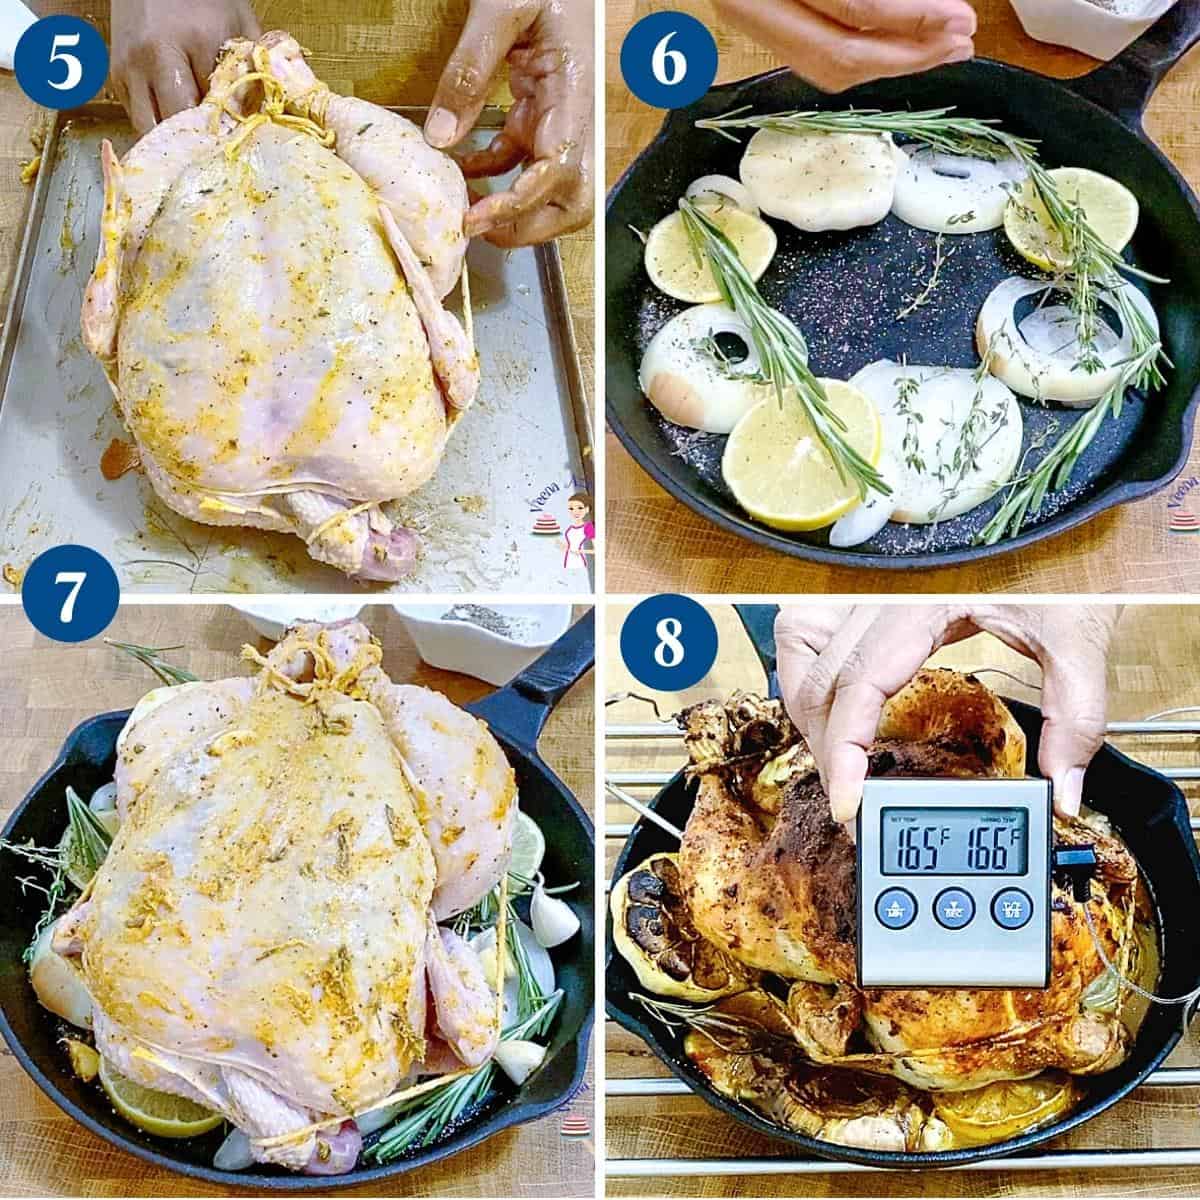 Progress pictures roasting the chicken in a cast iron skillet.